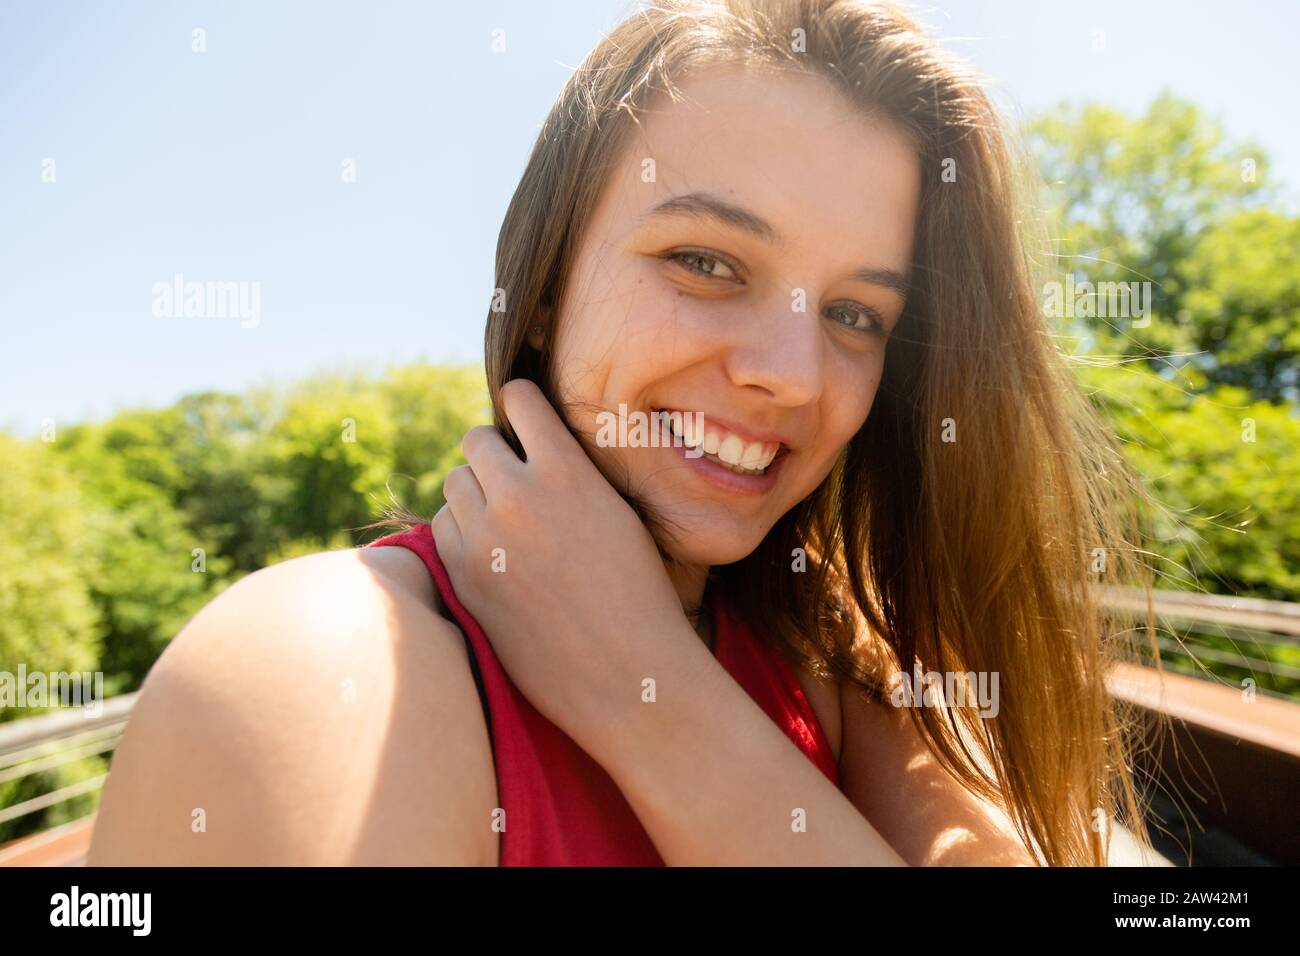 Portrait of a laughing young woman with messy hair because of the wind in a sunny day. Enjoyment in nature Stock Photo